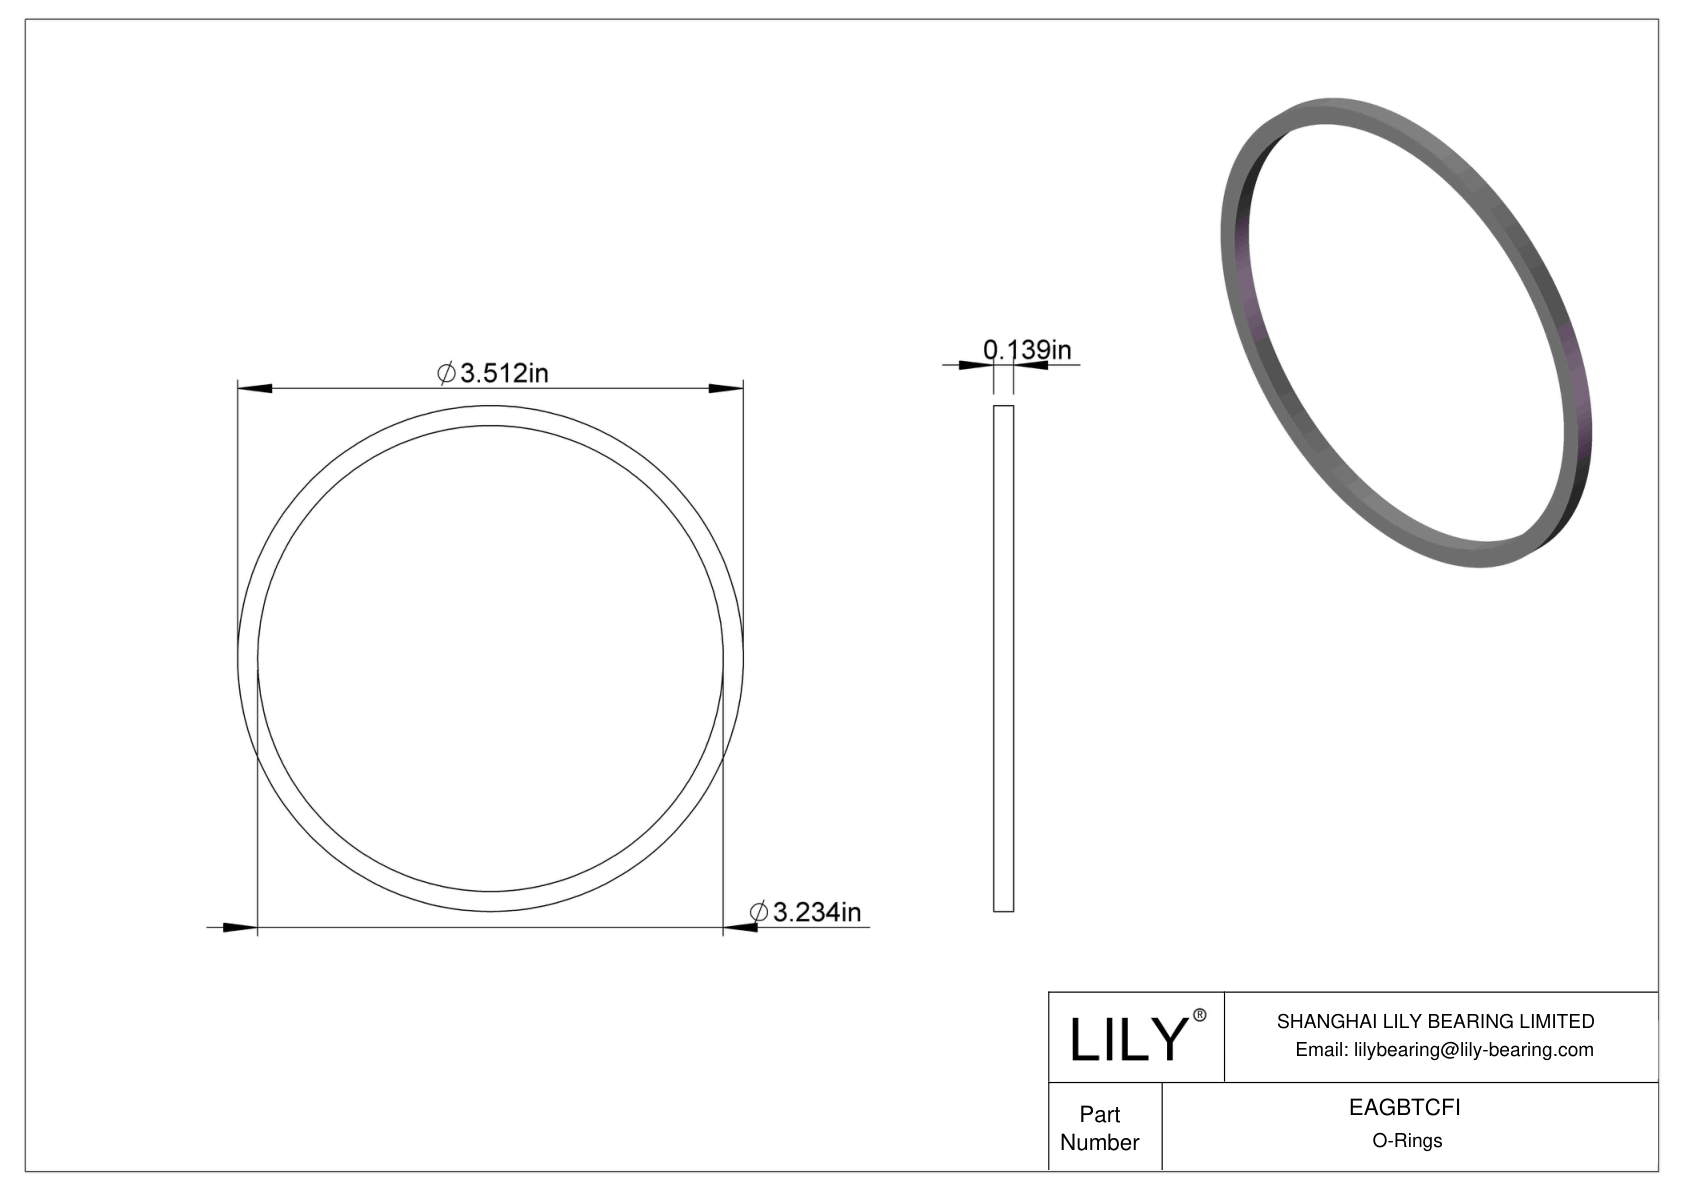 EAGBTCFI Oil Resistant O-Rings Square cad drawing